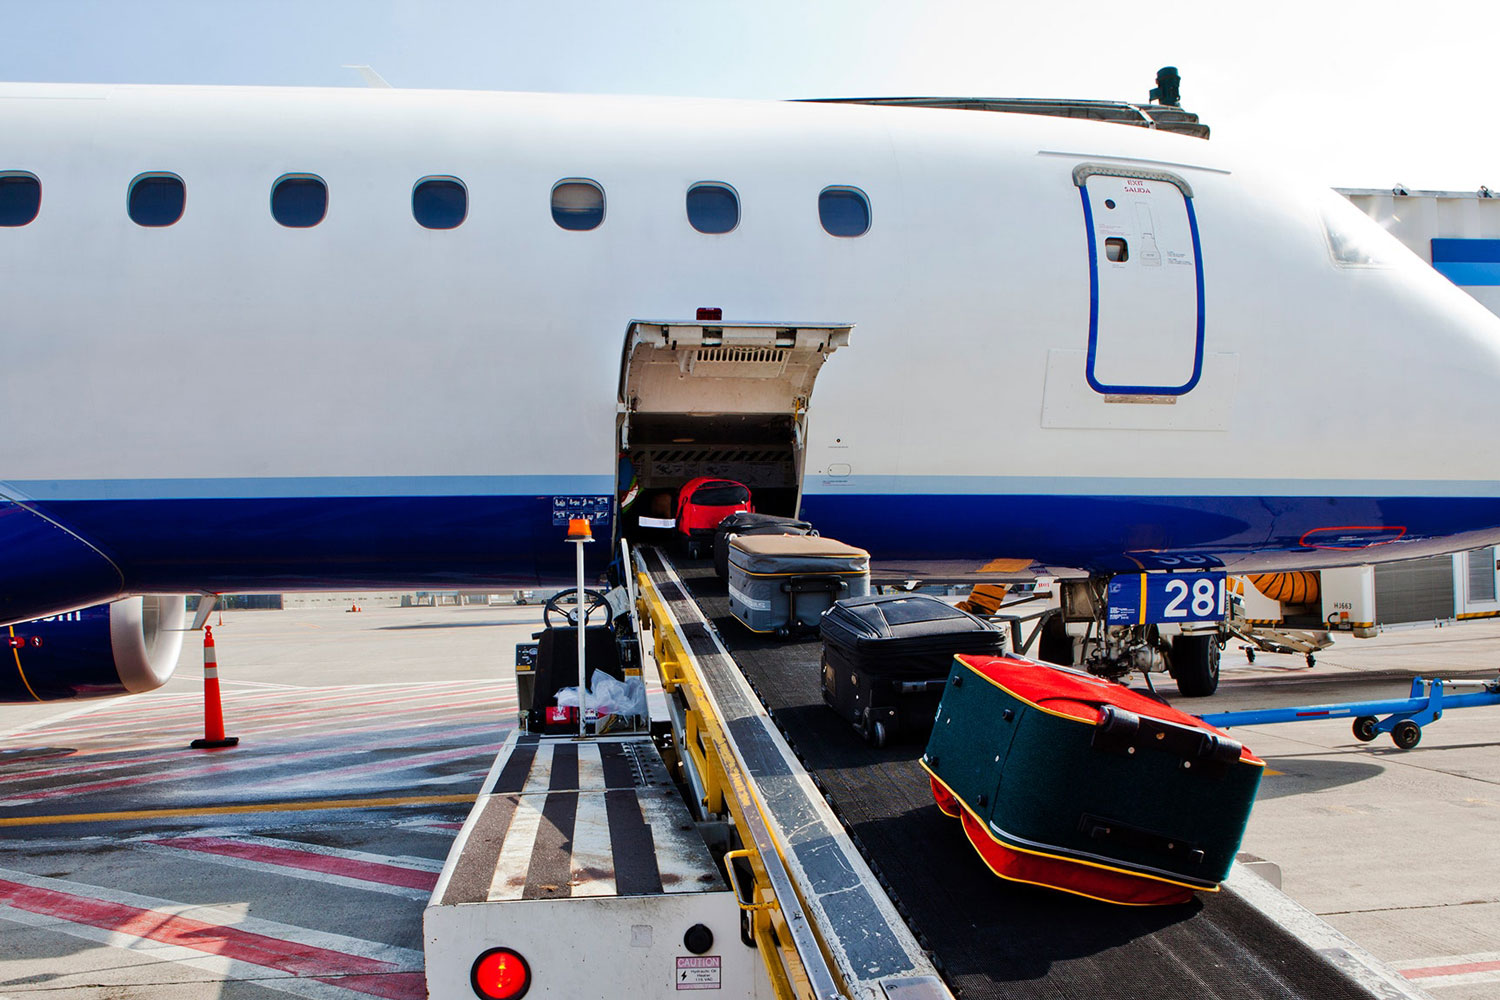 Baggage Handler Reveals What Really Happens To Your Luggage In The Belly Of A Plane